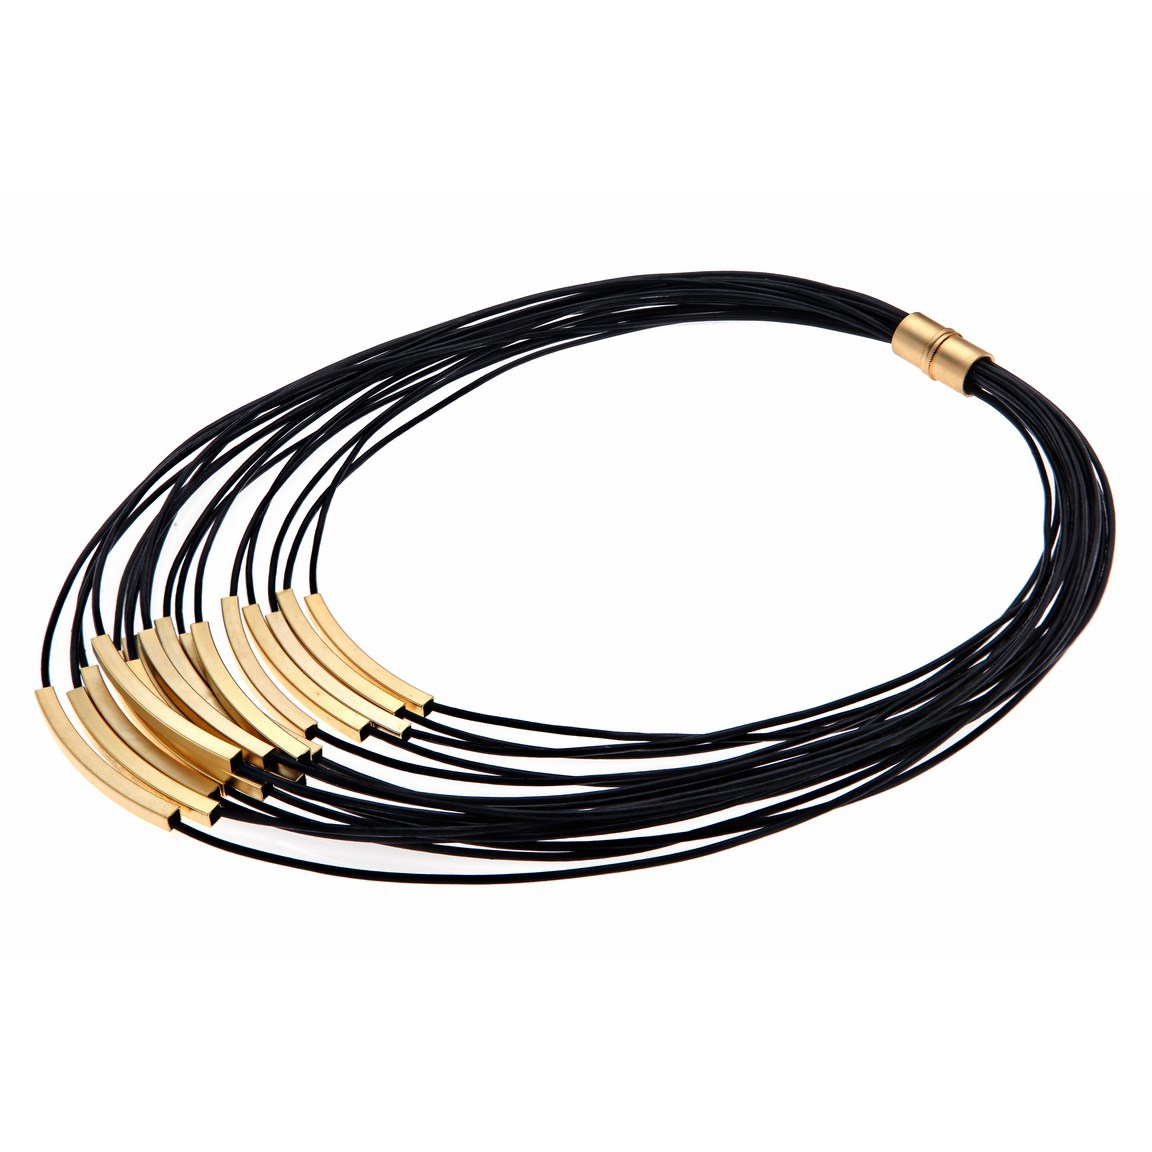 Hagar Satat Gold Plated Leather Stack Necklace - Black - 1